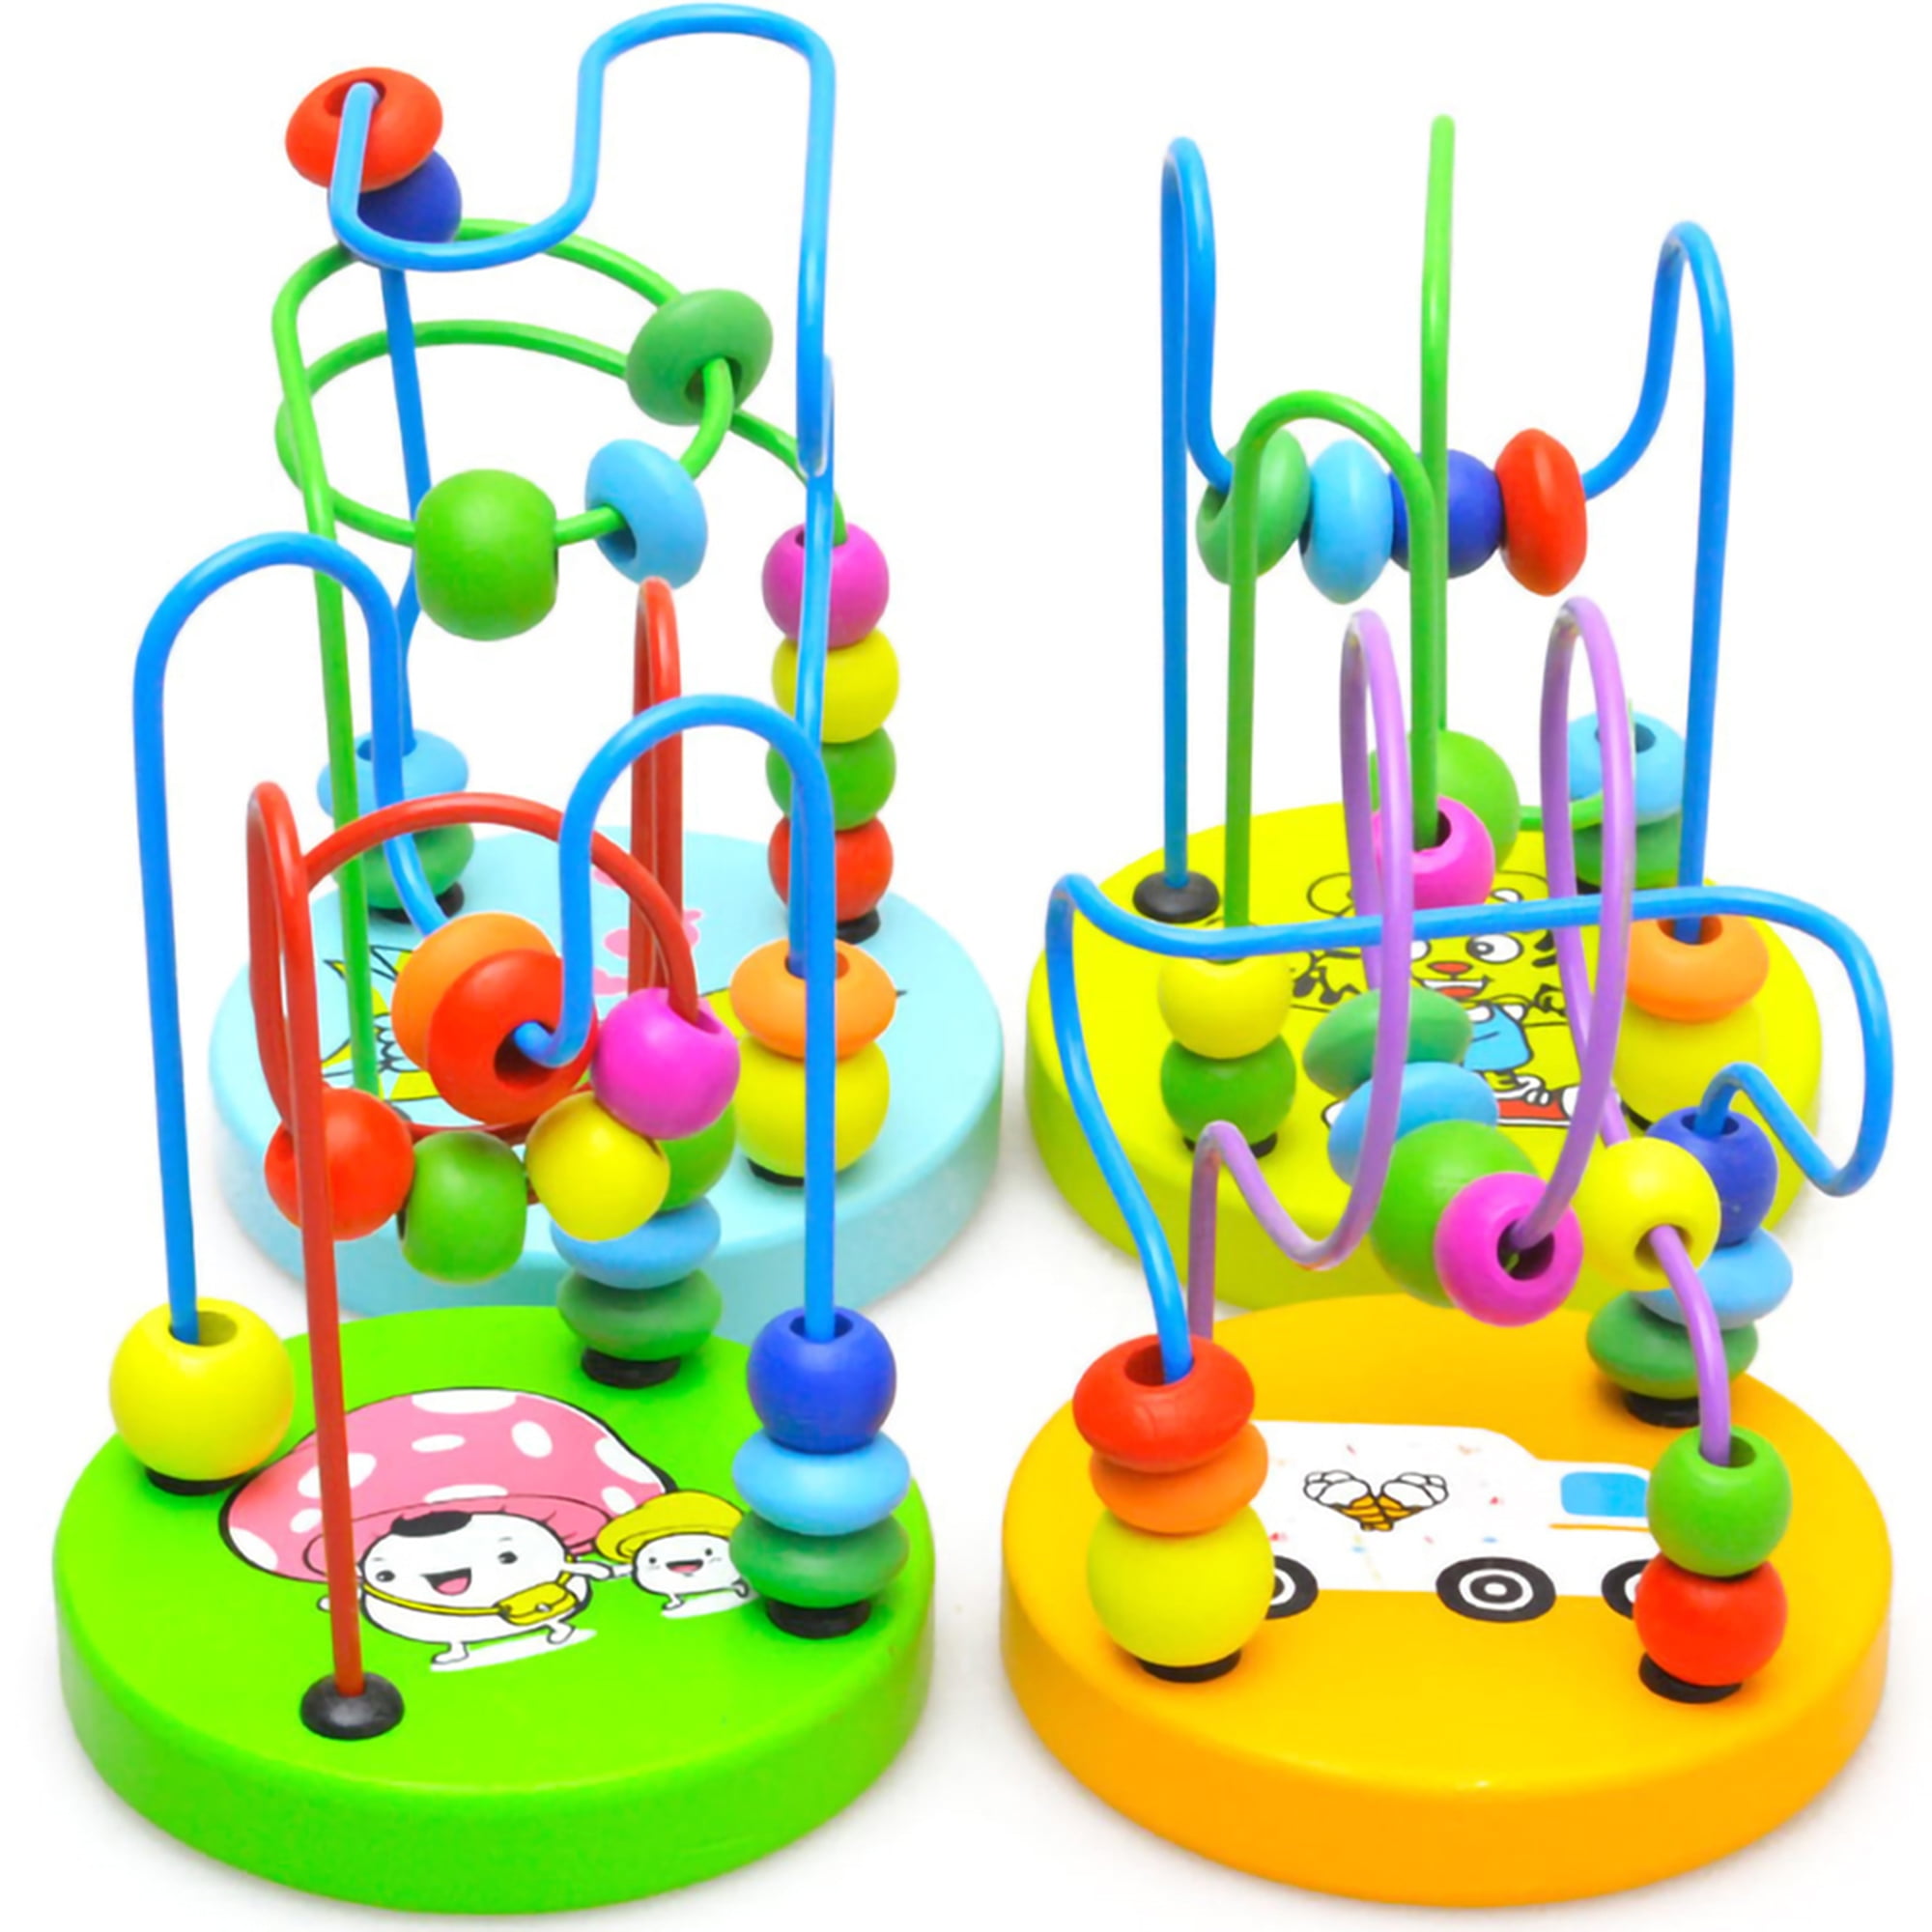 Colorful Wooden Around Beads Baby Infant Children Kids Educational Game Toy Gift 